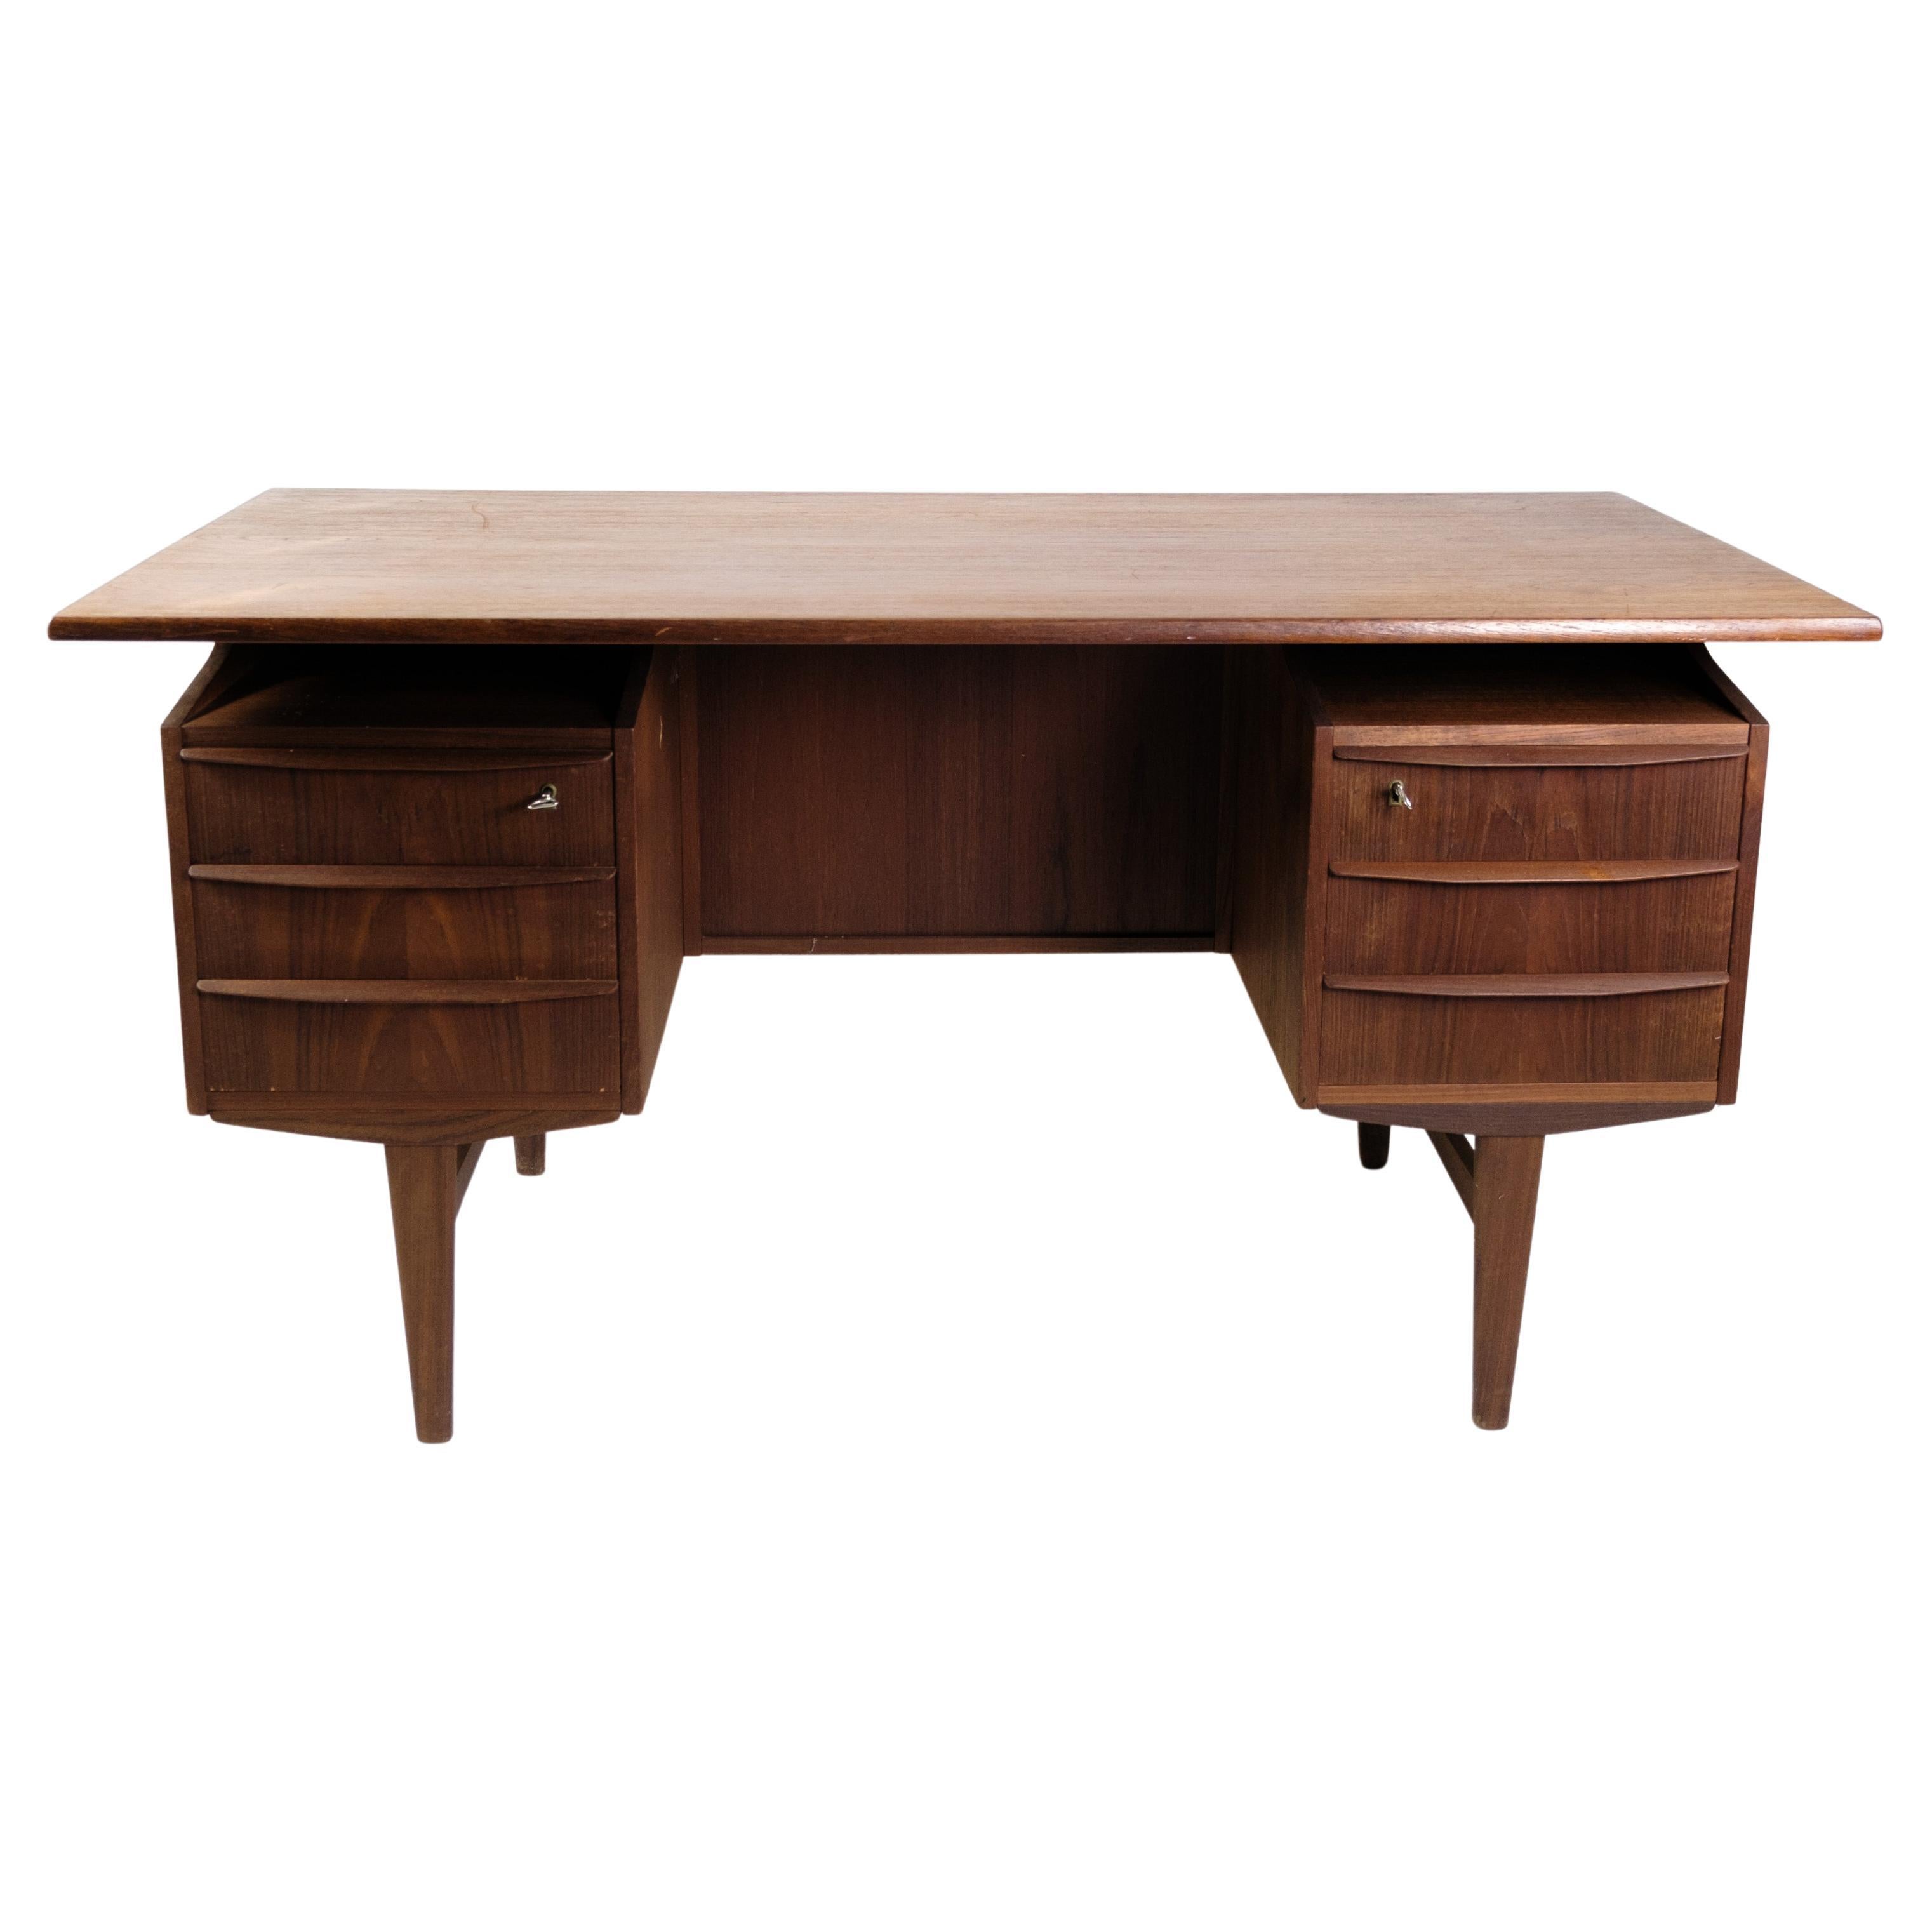 Desk Made In Teak Designed With A Floating TableTop From 1960s